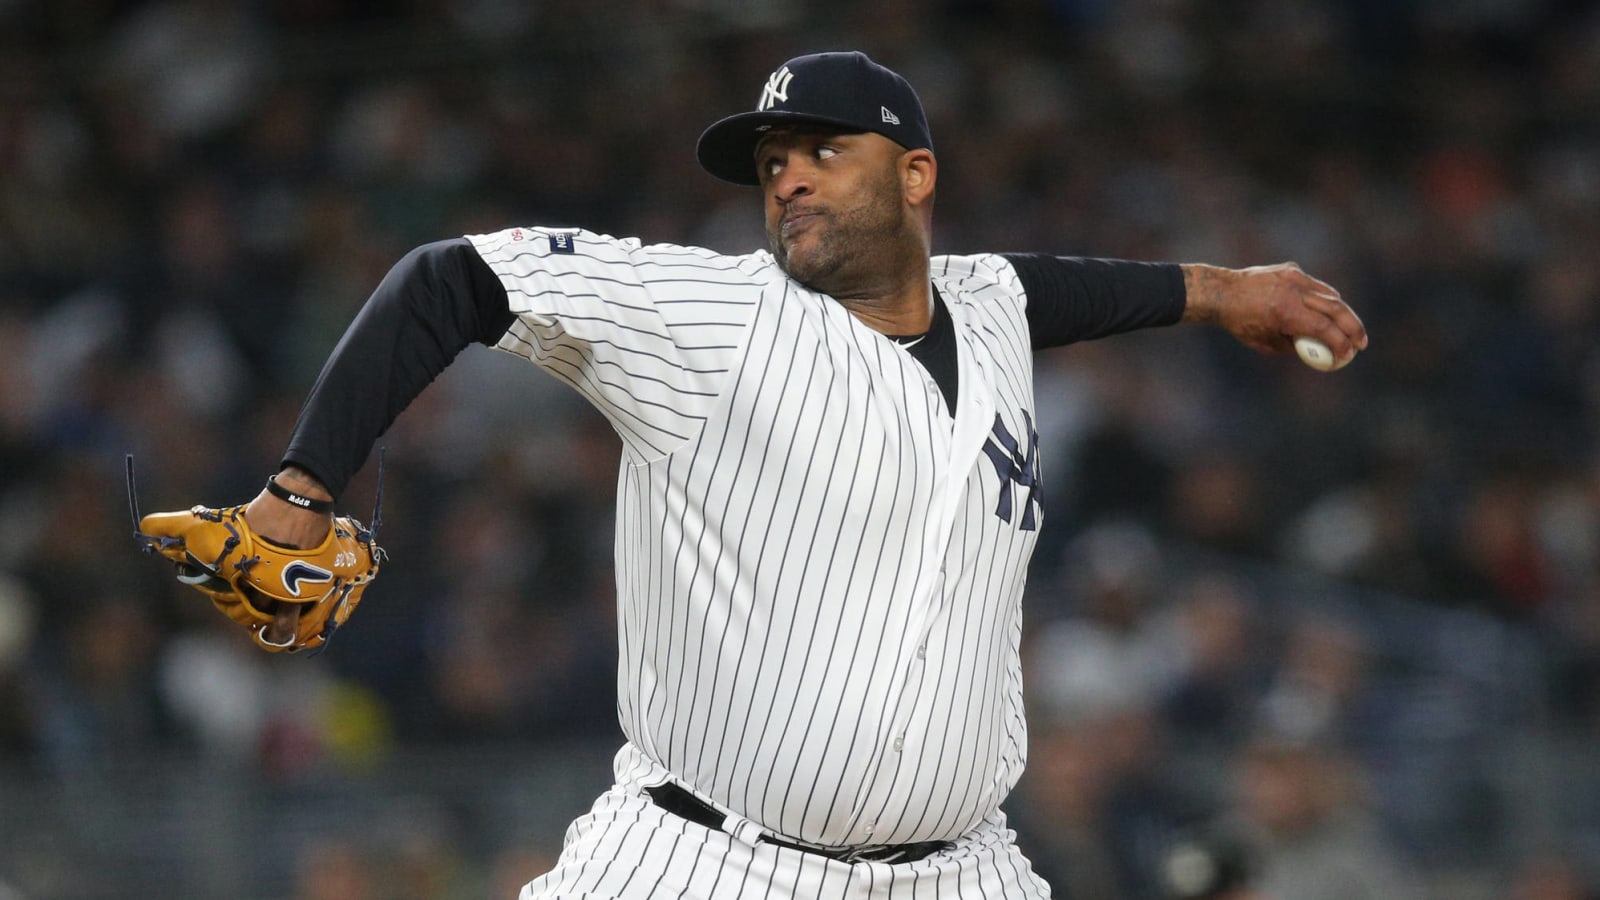 CC Sabathia has lost a ton of weight, is looking jacked in retirement